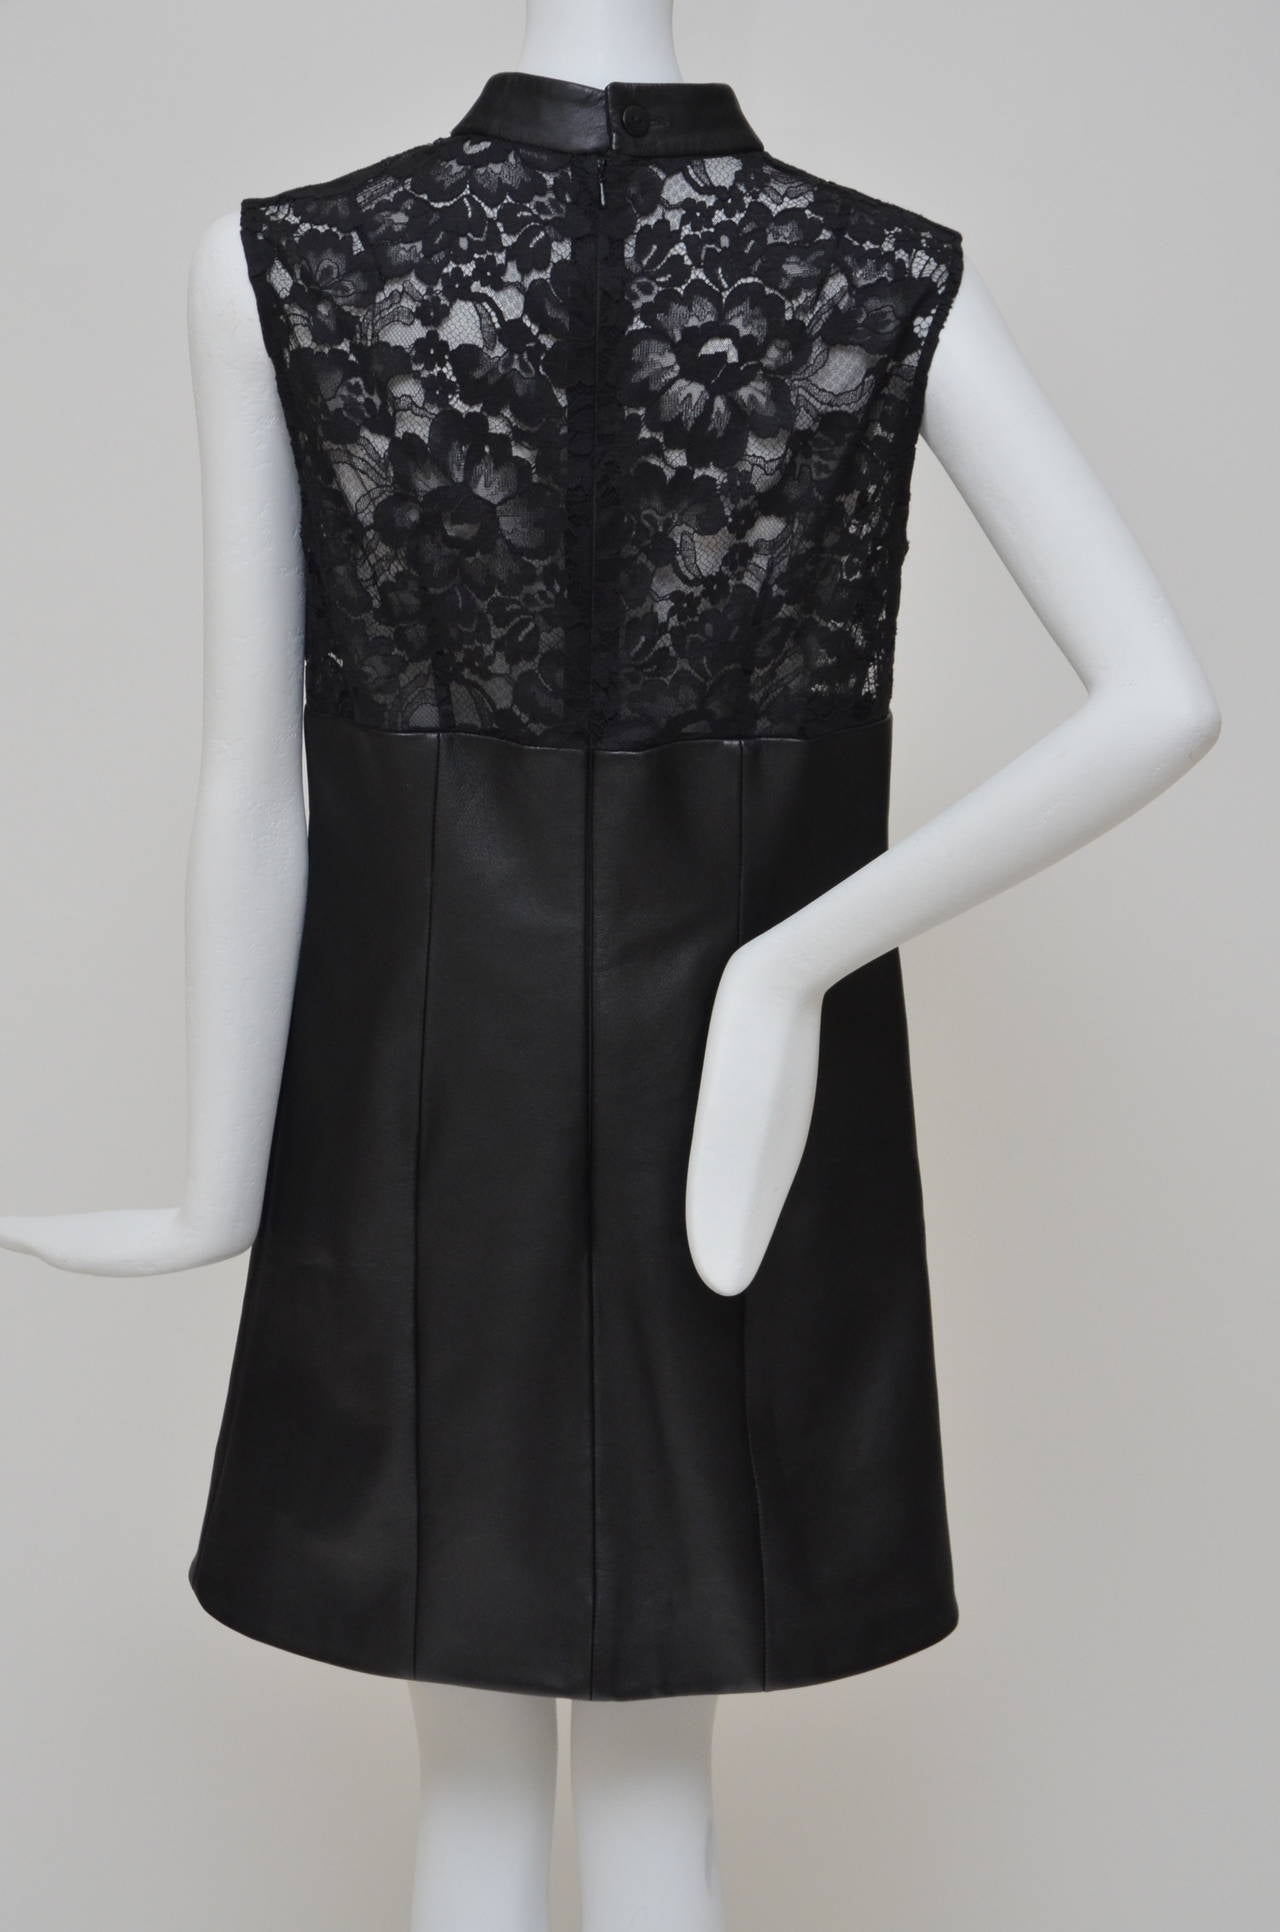 Black leather and lace dress with embroidered floral detail. Christopher Kane dress is sleeveless, has a leather collar, a concealed zip fastening at back, an exposed button fastening at nape of neck, darts at front and back and is partially lined.